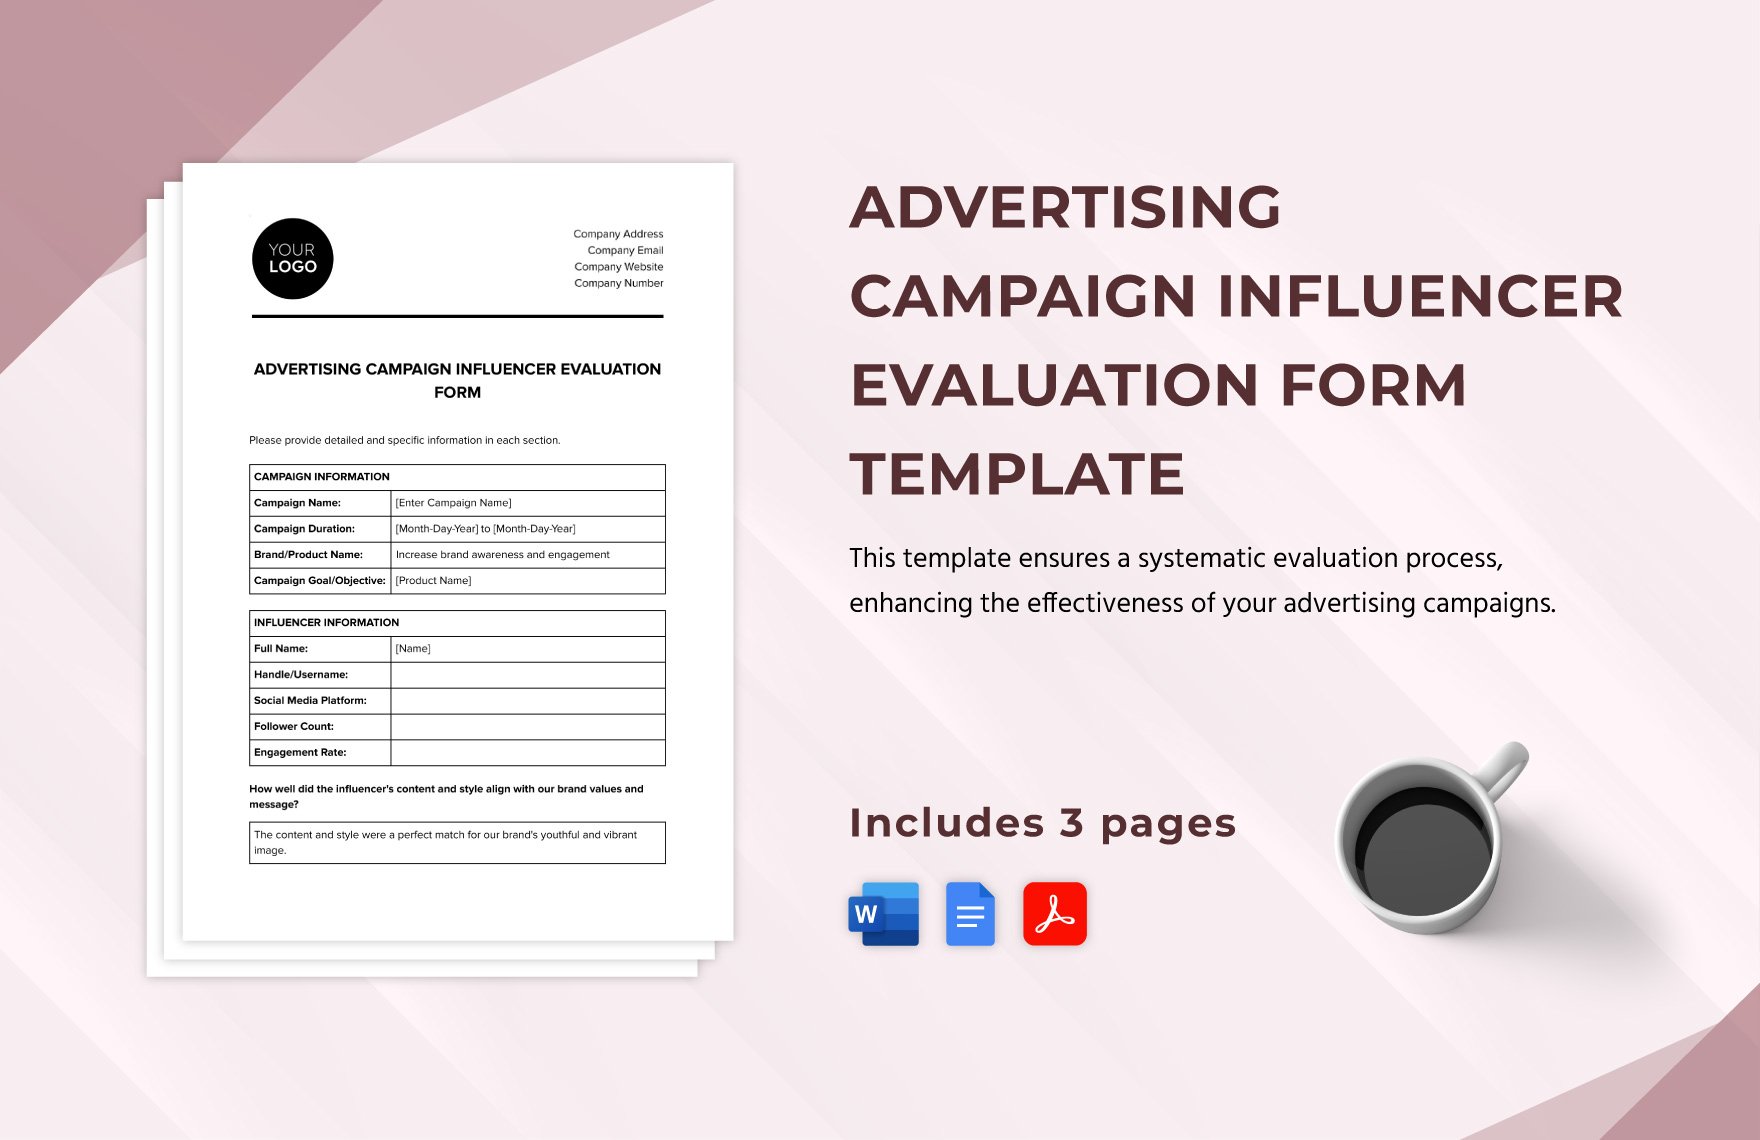 Advertising Campaign Influencer Evaluation Form Template in Word, Google Docs, PDF